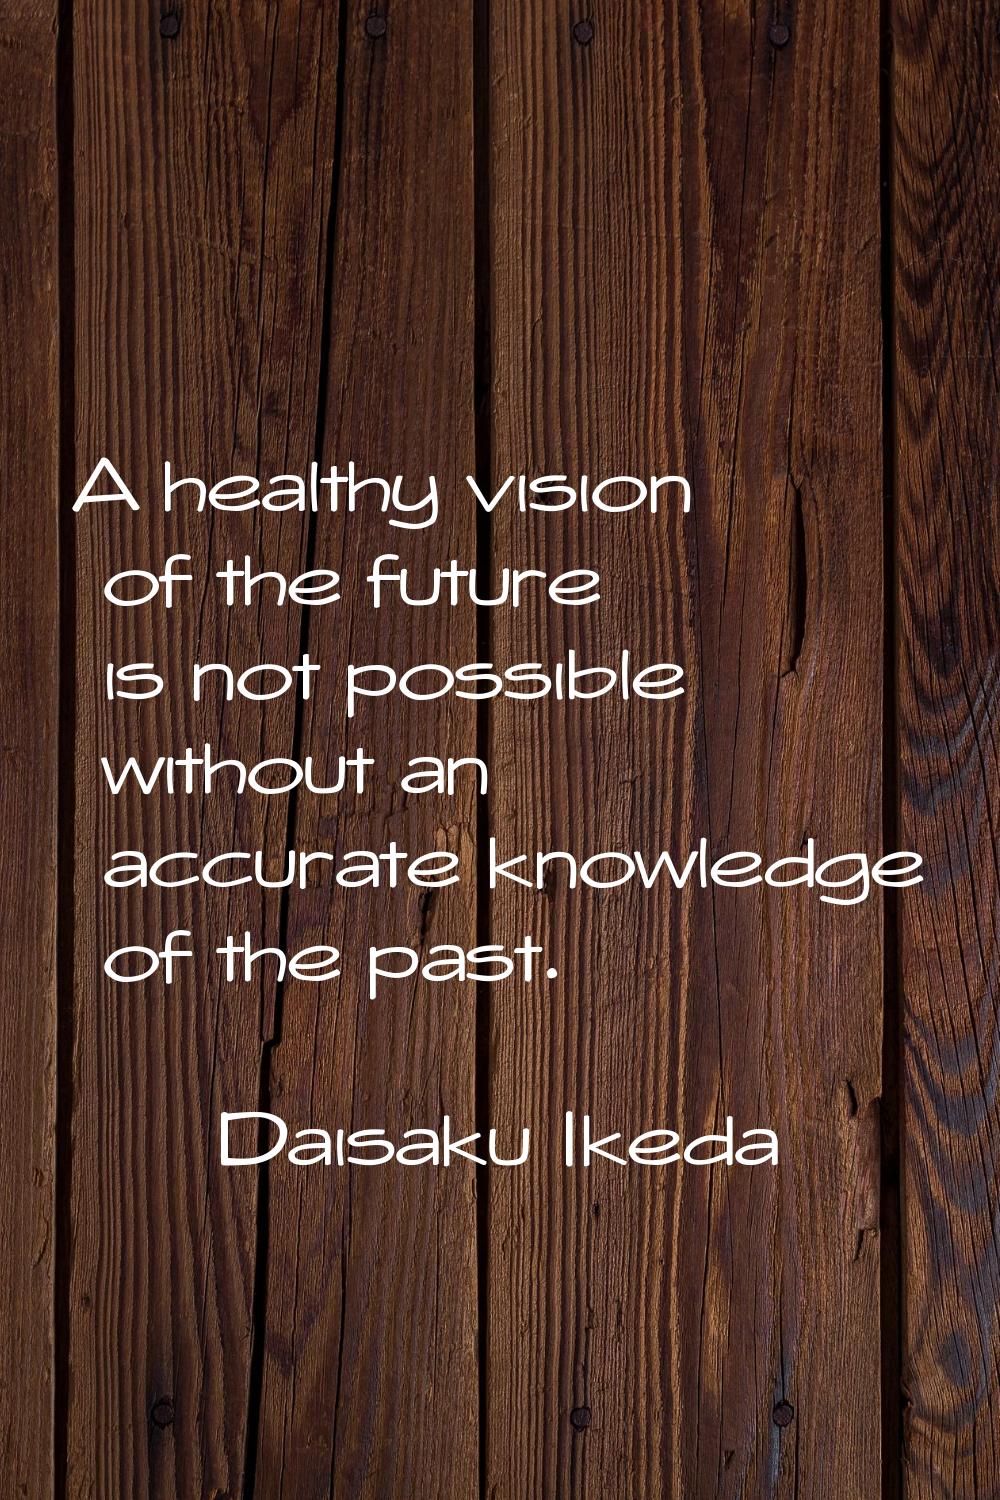 A healthy vision of the future is not possible without an accurate knowledge of the past.